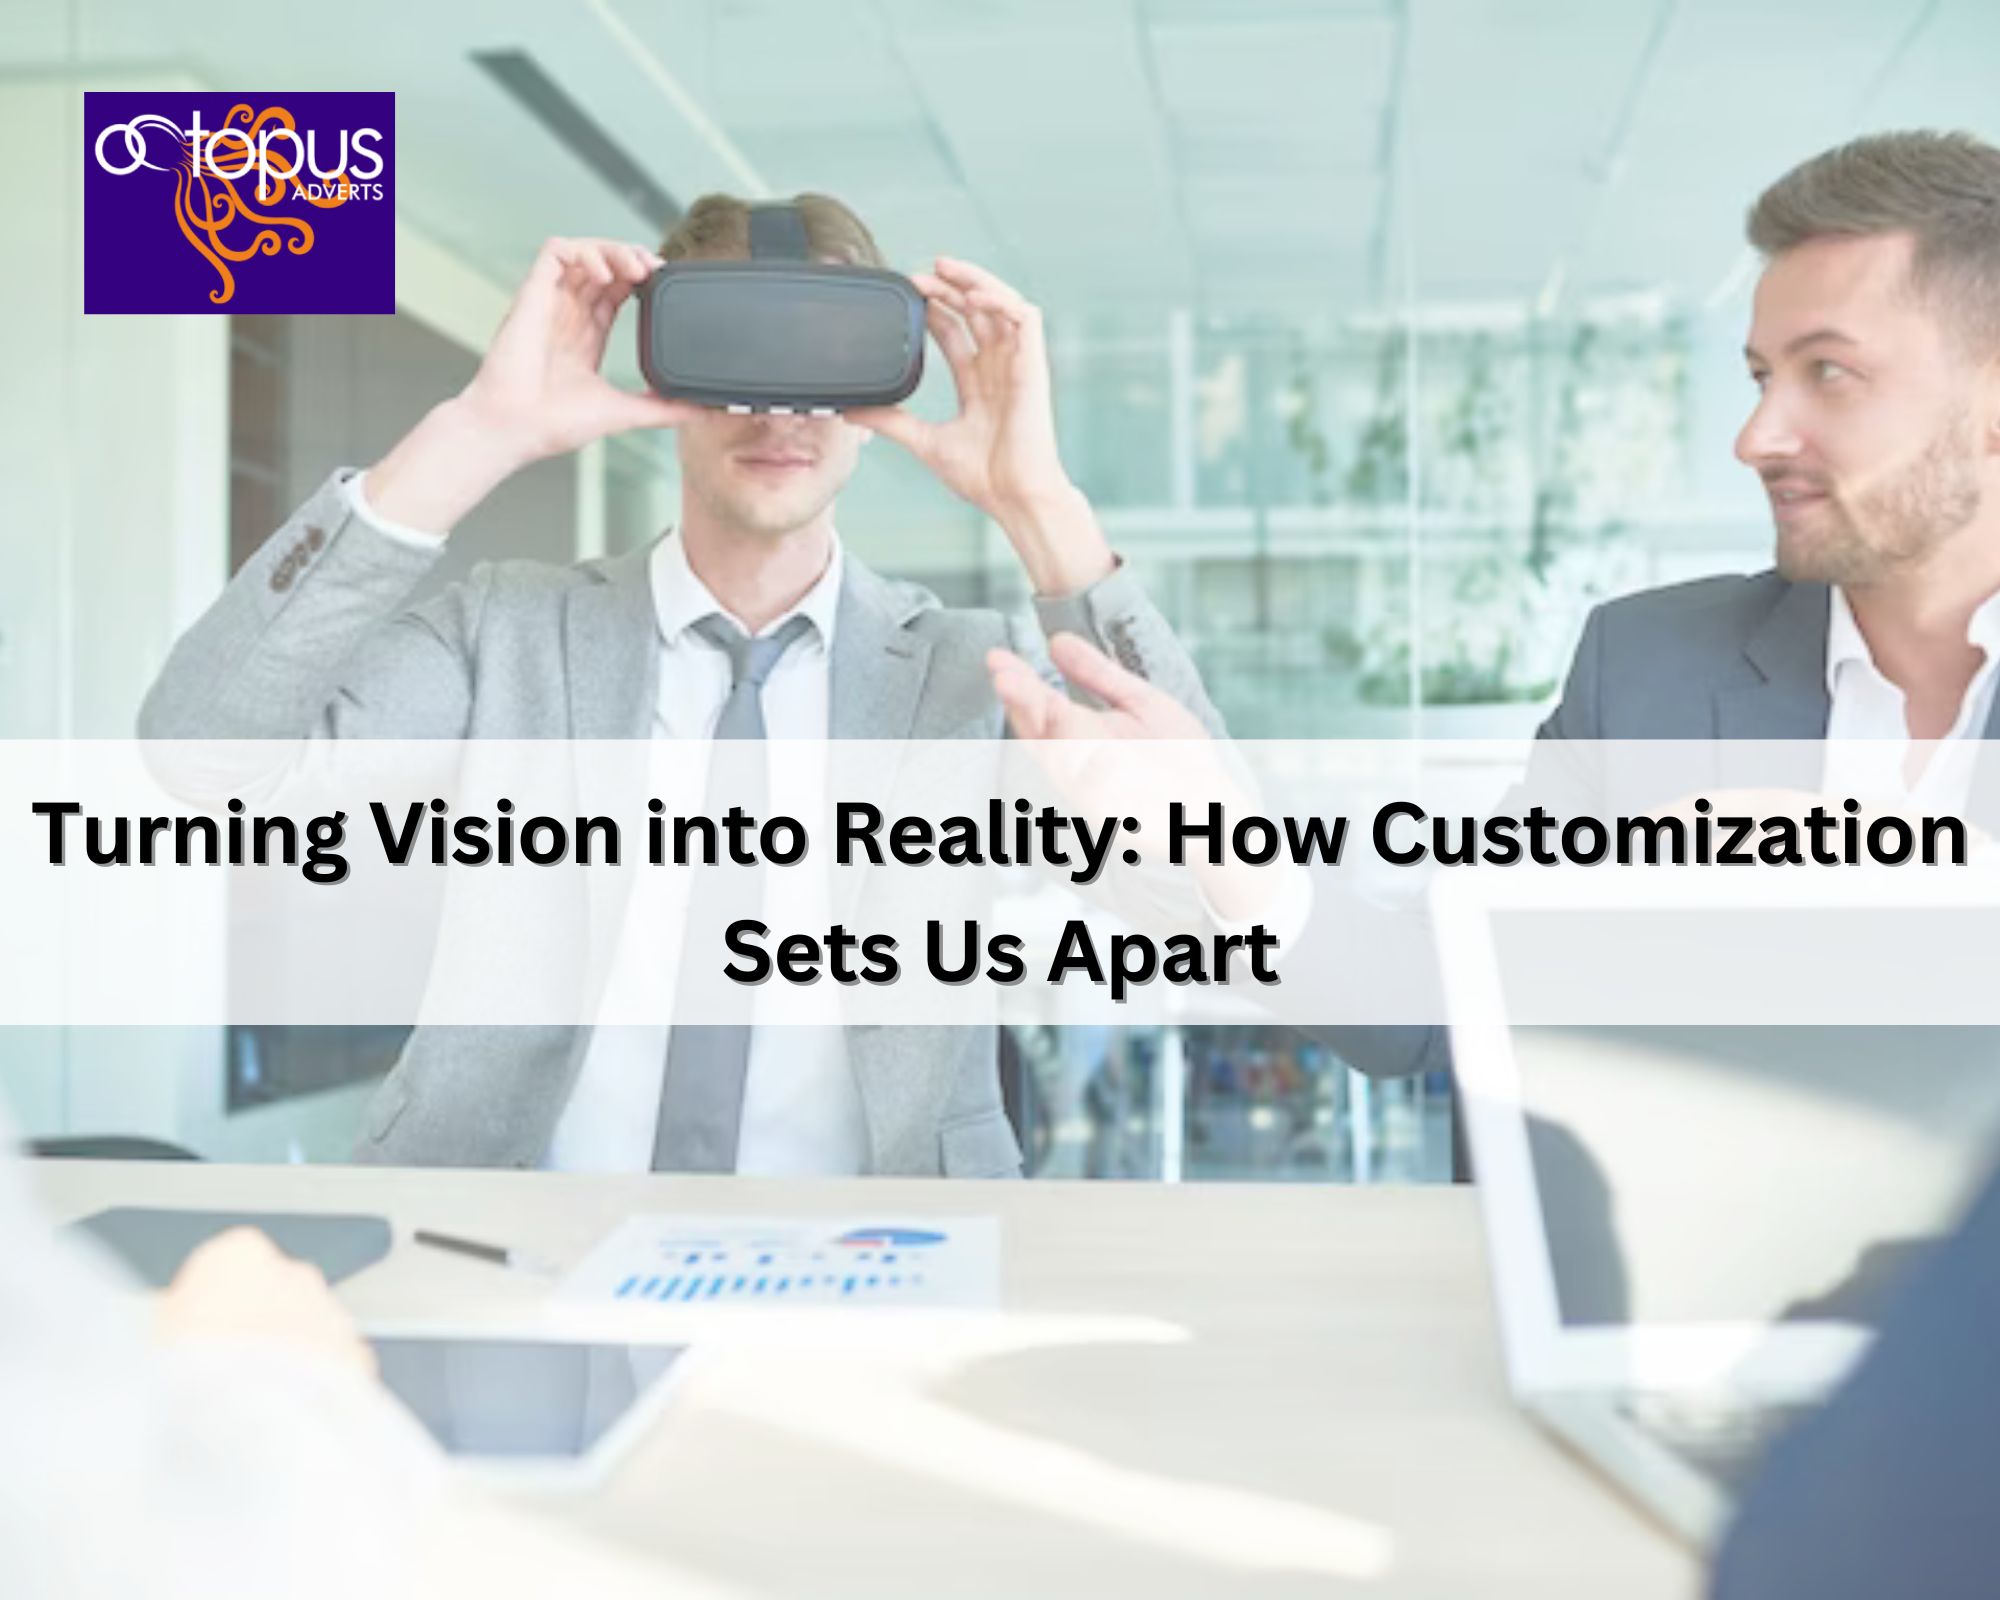 Turning Vision into Reality: How Customization Sets Us Apart